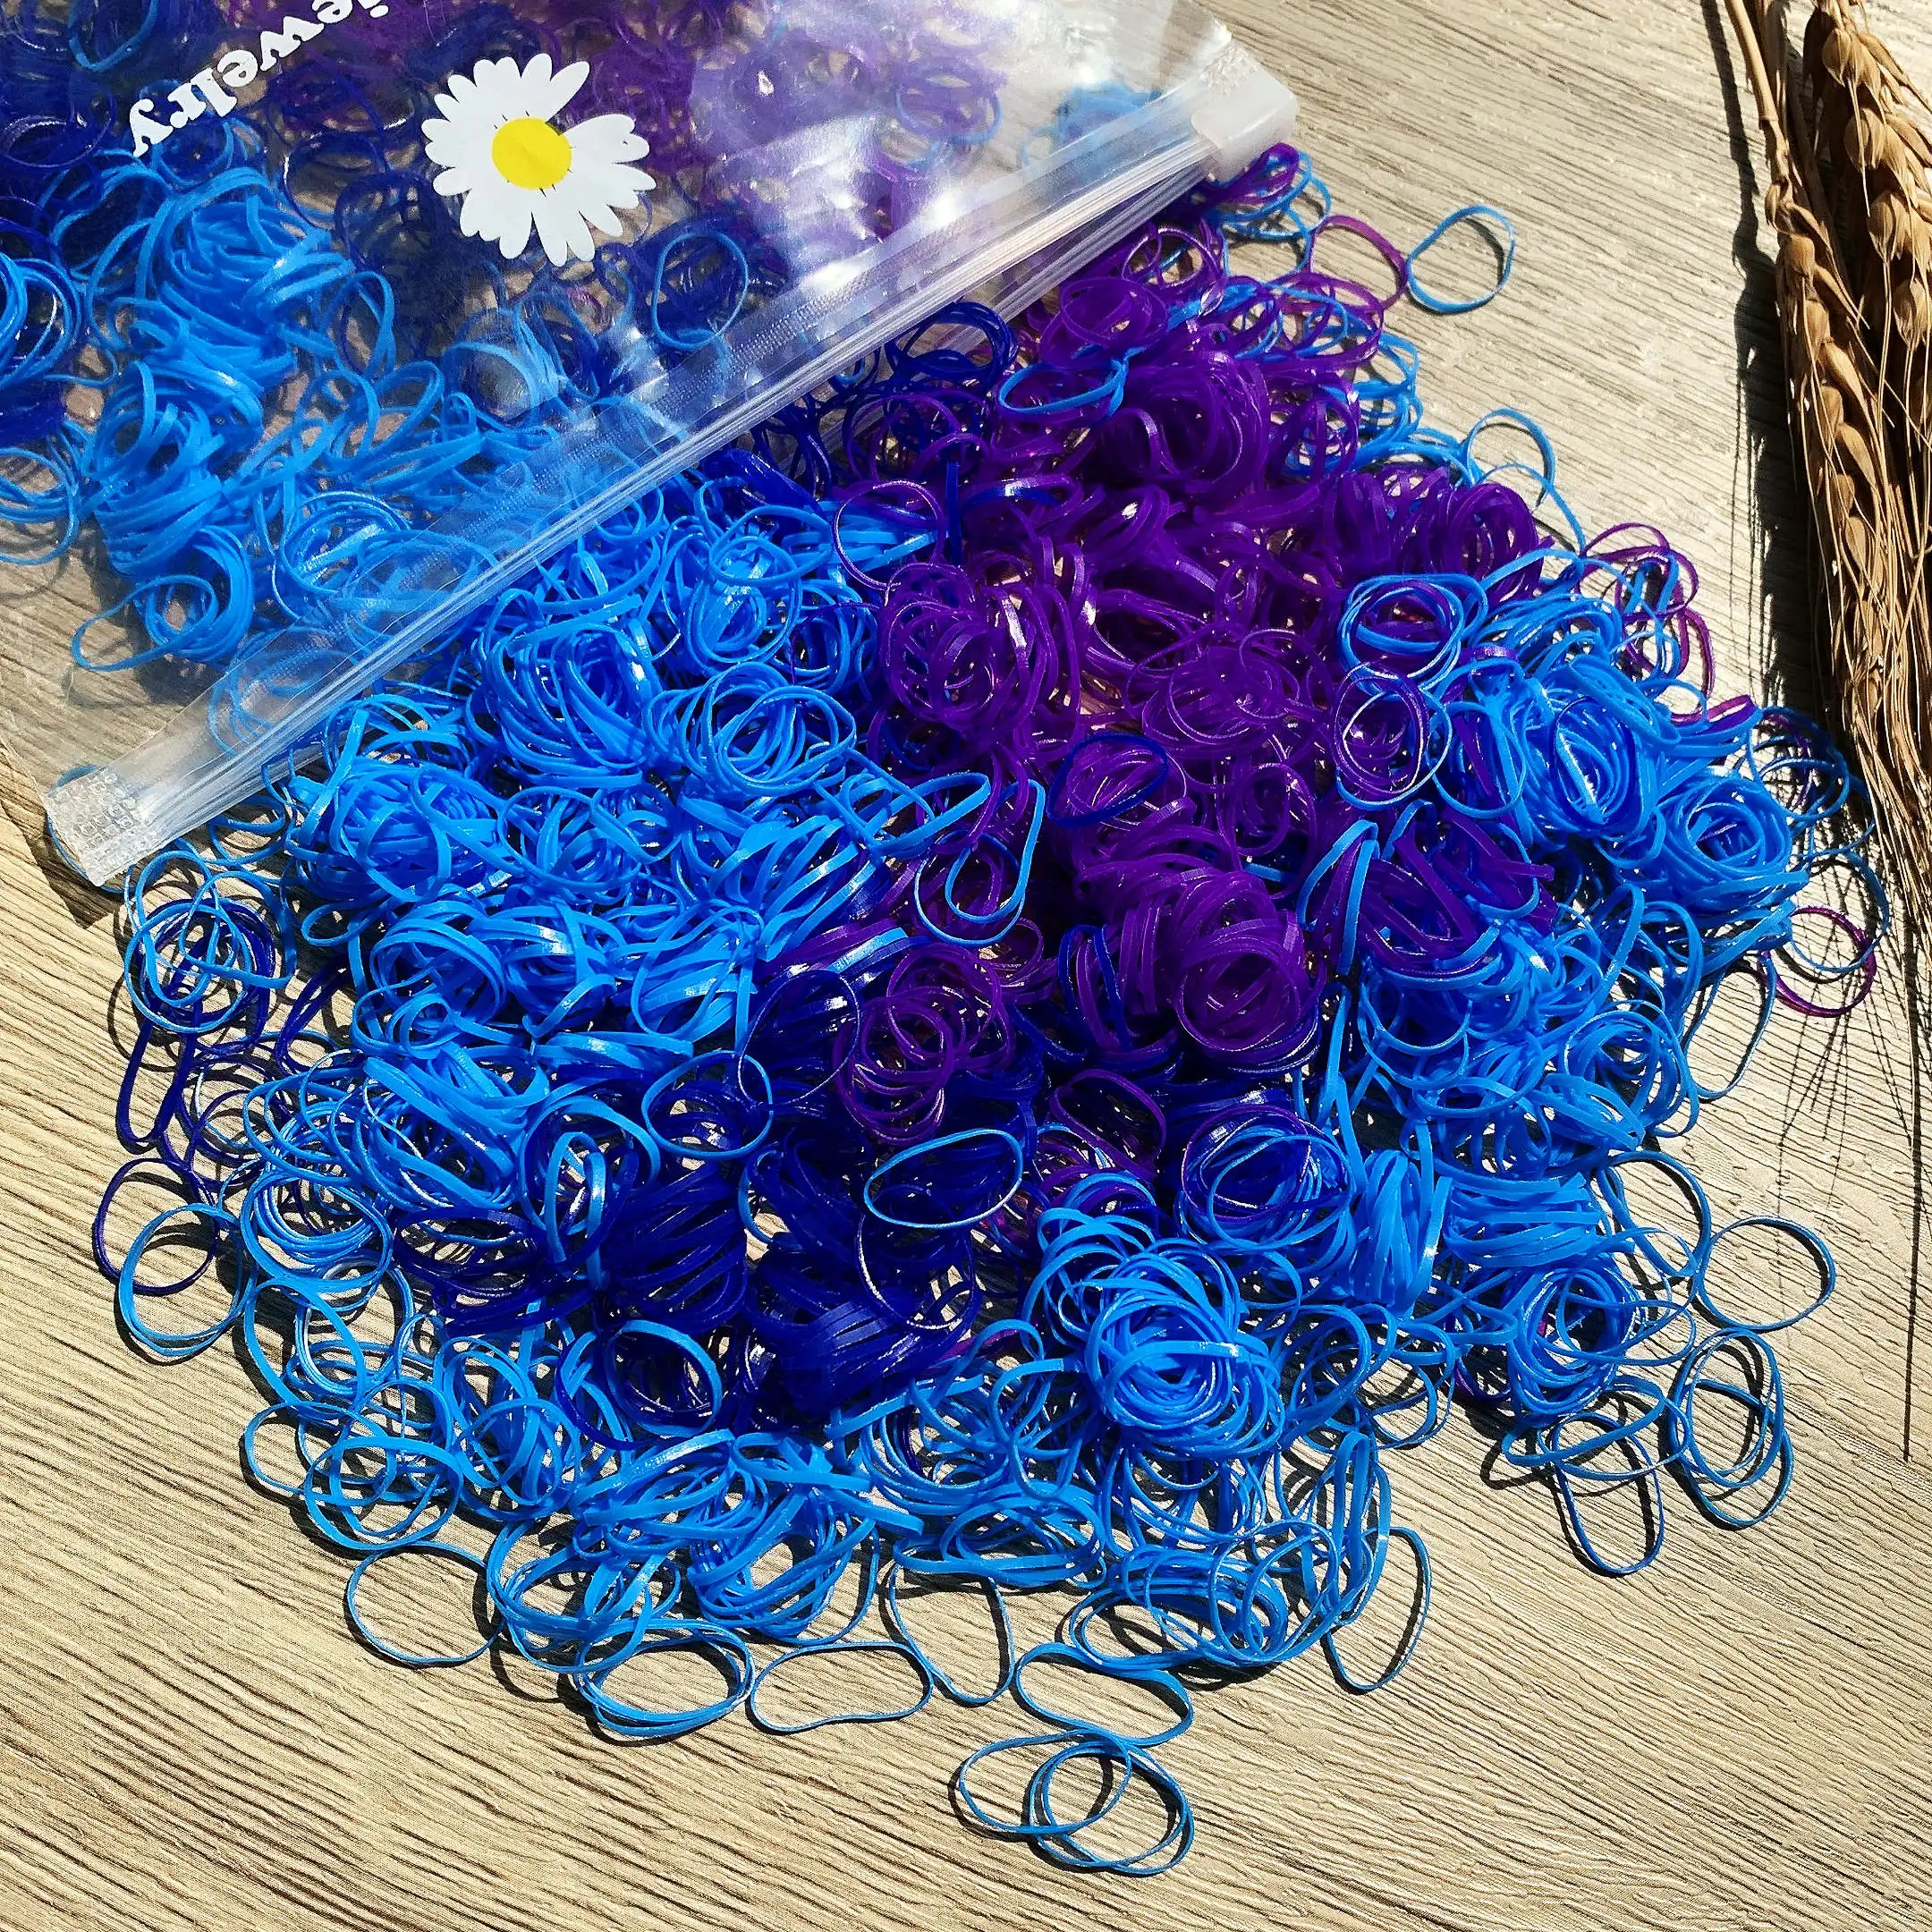 2000PCS Girls Colorful Small Disposable Hair Bands Elastic Rubber Bands Ponytail Holder Kids Headbands Hair Accessories Hair Tie gold hair clips